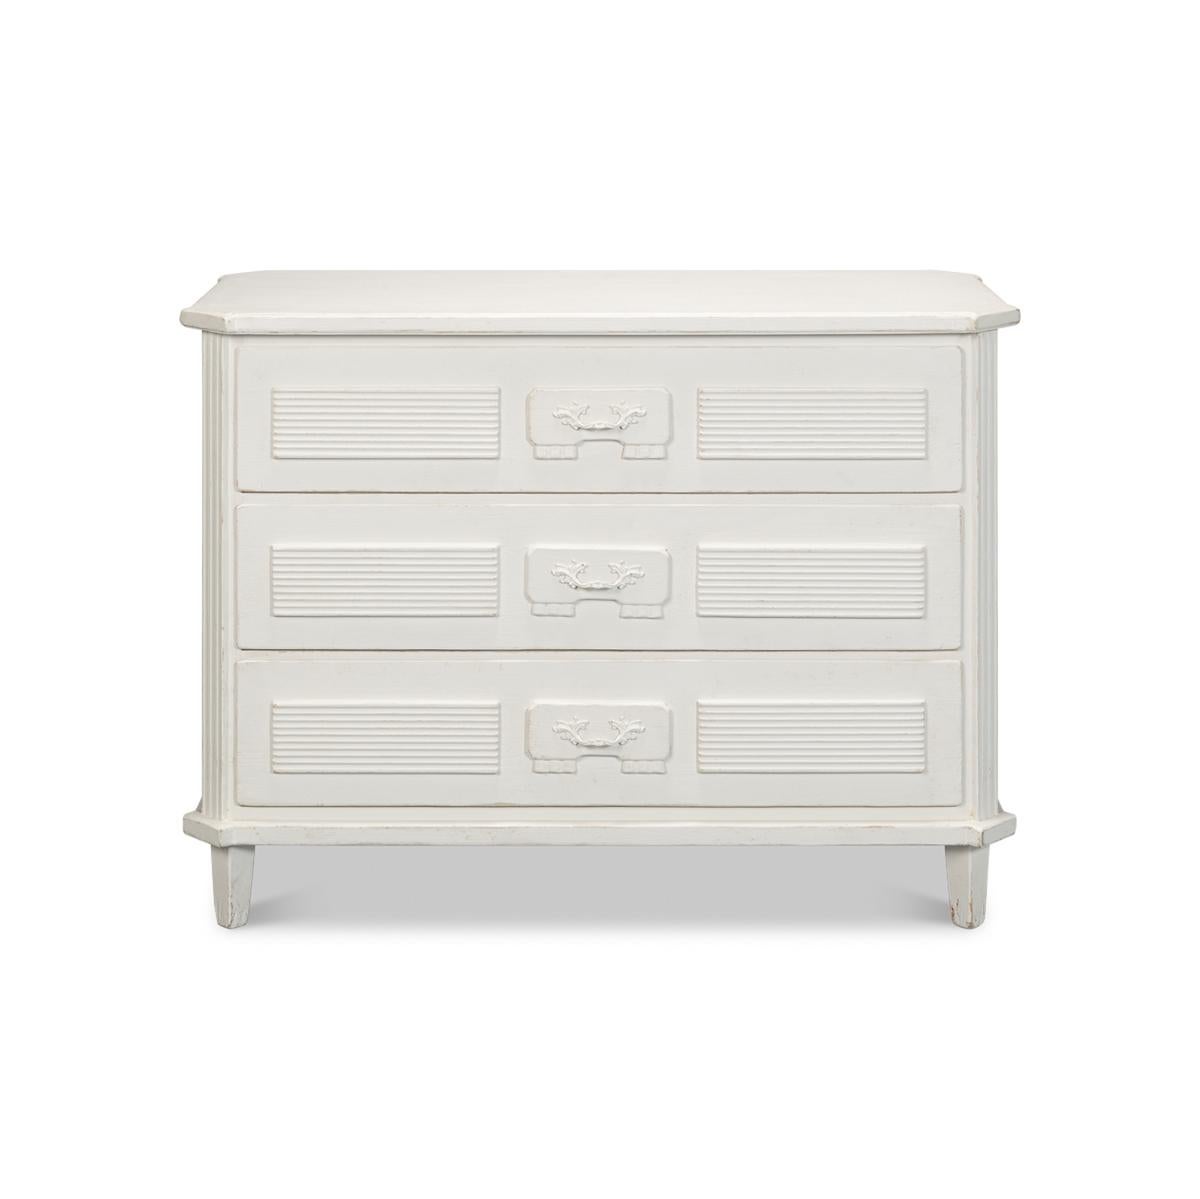 Made with reclaimed pine in an antique white hand-rubbed and distressed painted finish. The three long drawers with neo-classic motifs and canted corners with fluted styles., all raised on square tapered legs.

Dimensions: 46